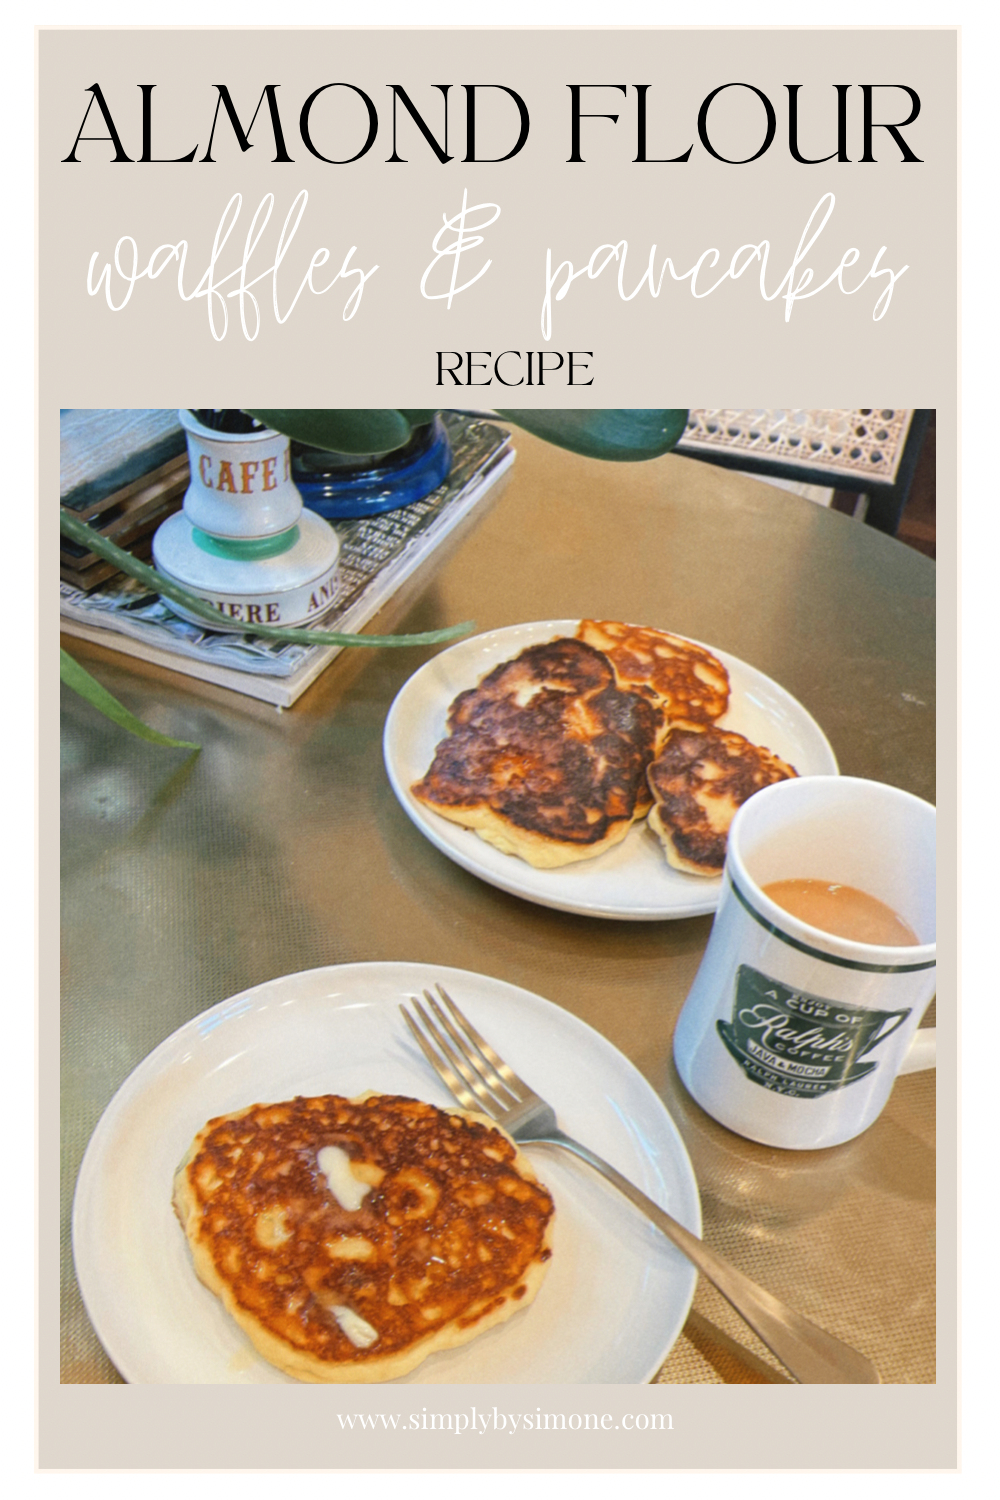 Almond Flour Waffles and Pancakes Recipe | Keto Waffle Recipe | Keto Pancake Recipe | Gestational Diabetes Recipes | Almond Flour Waffles with Cinnamon | Almond Flour Pancakes with Cinnamon | Fall Breakfast Recipes | Healthy Breakfast Recipes | Healthy Pancakes Recipes | Healthy Waffles Recipes | Easy Breakfasts for Fall | Simply by Simone